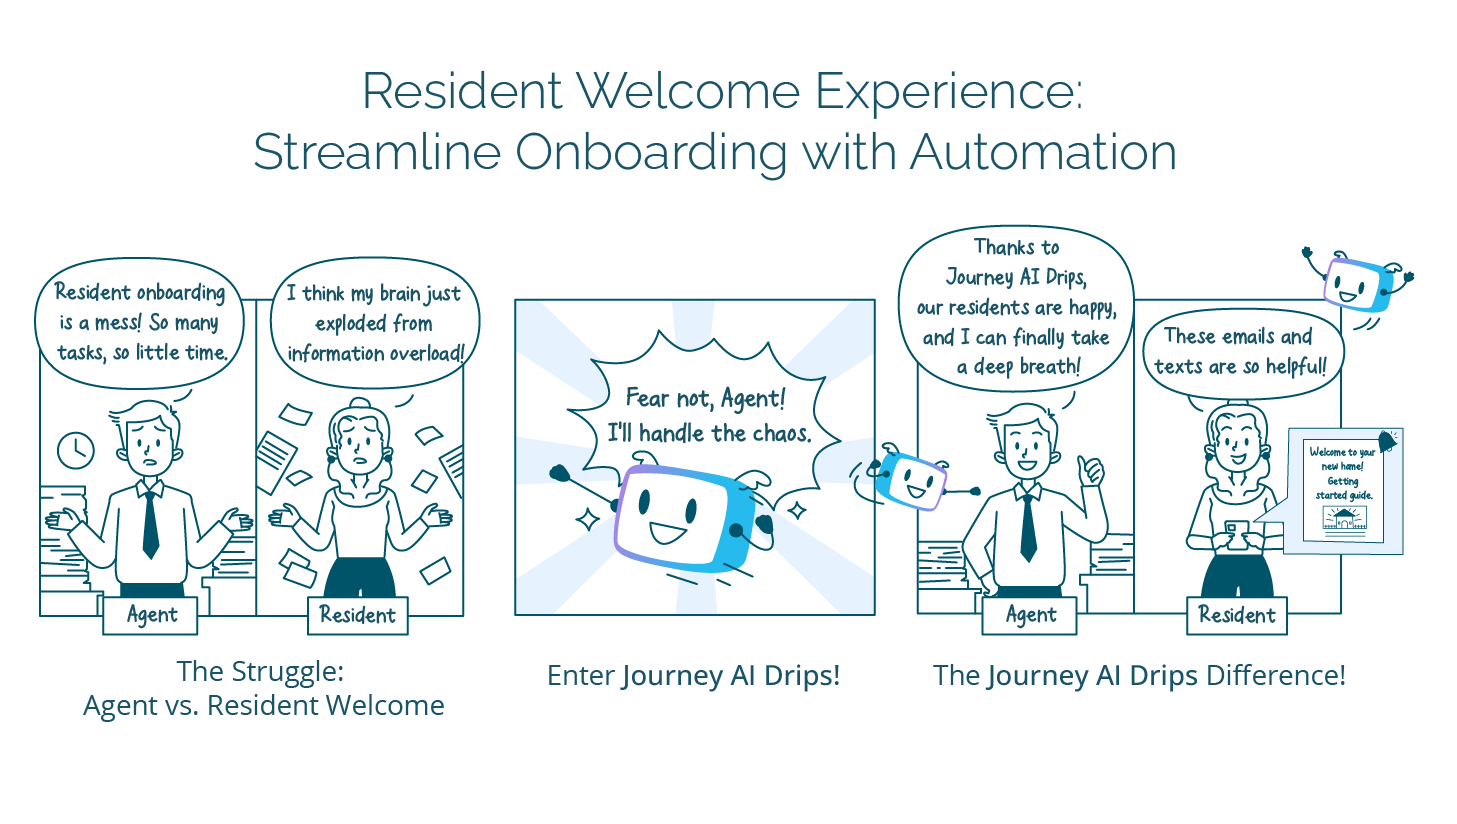 Resident Welcome Experience helps the agent and residents